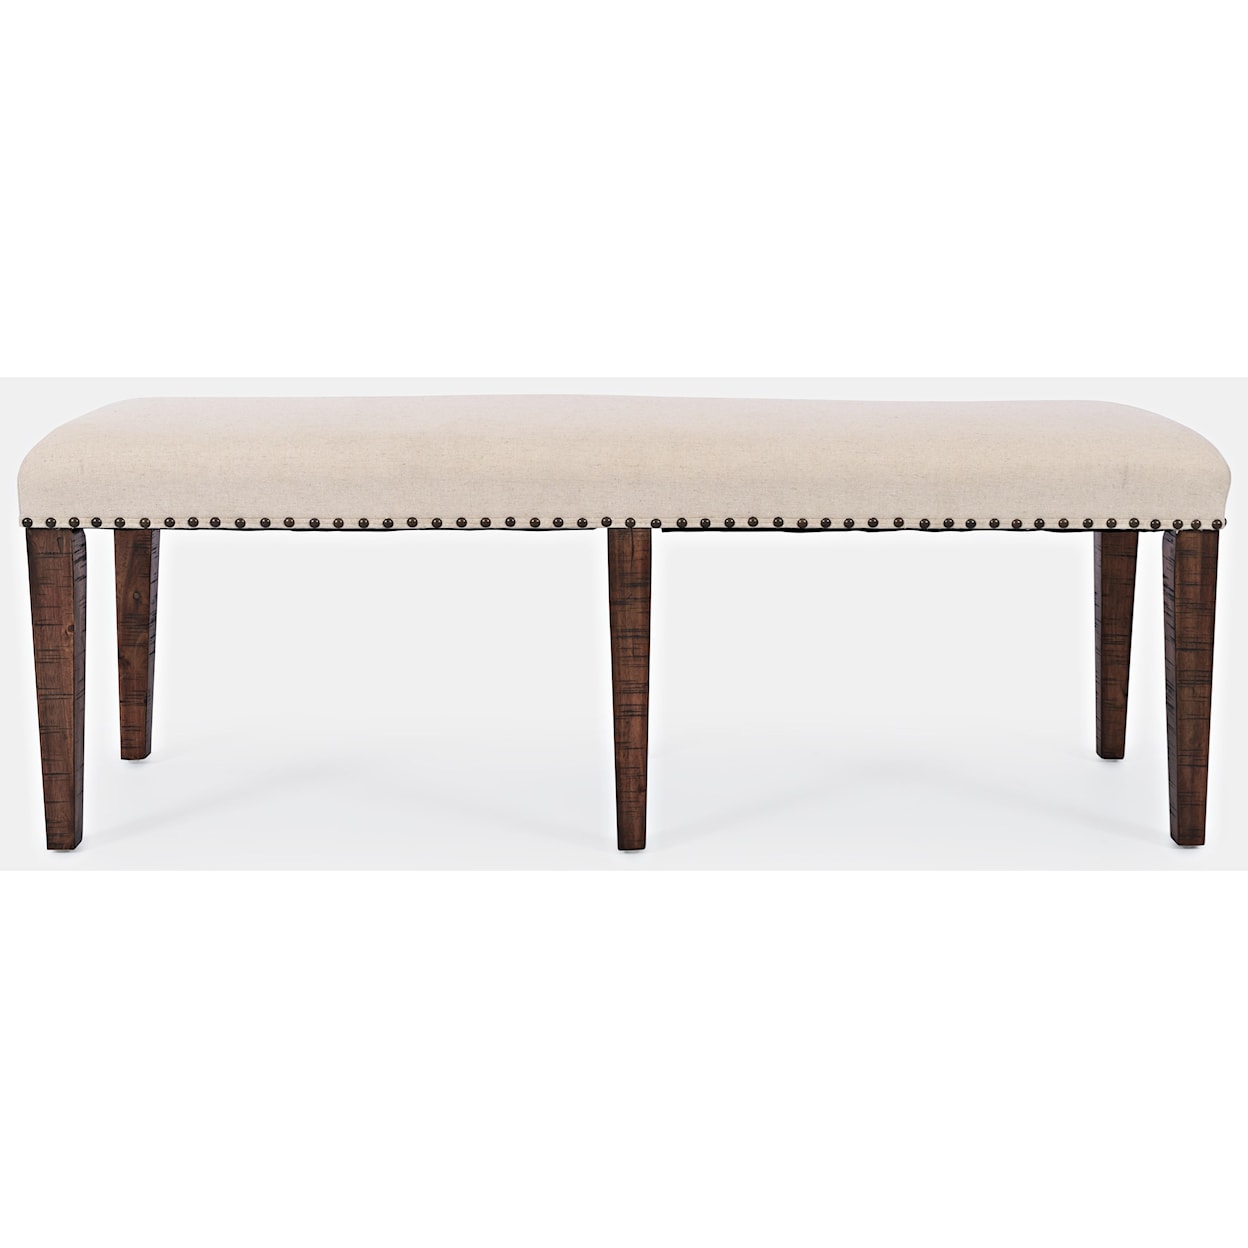 Jofran Fairview Backless Dining Bench